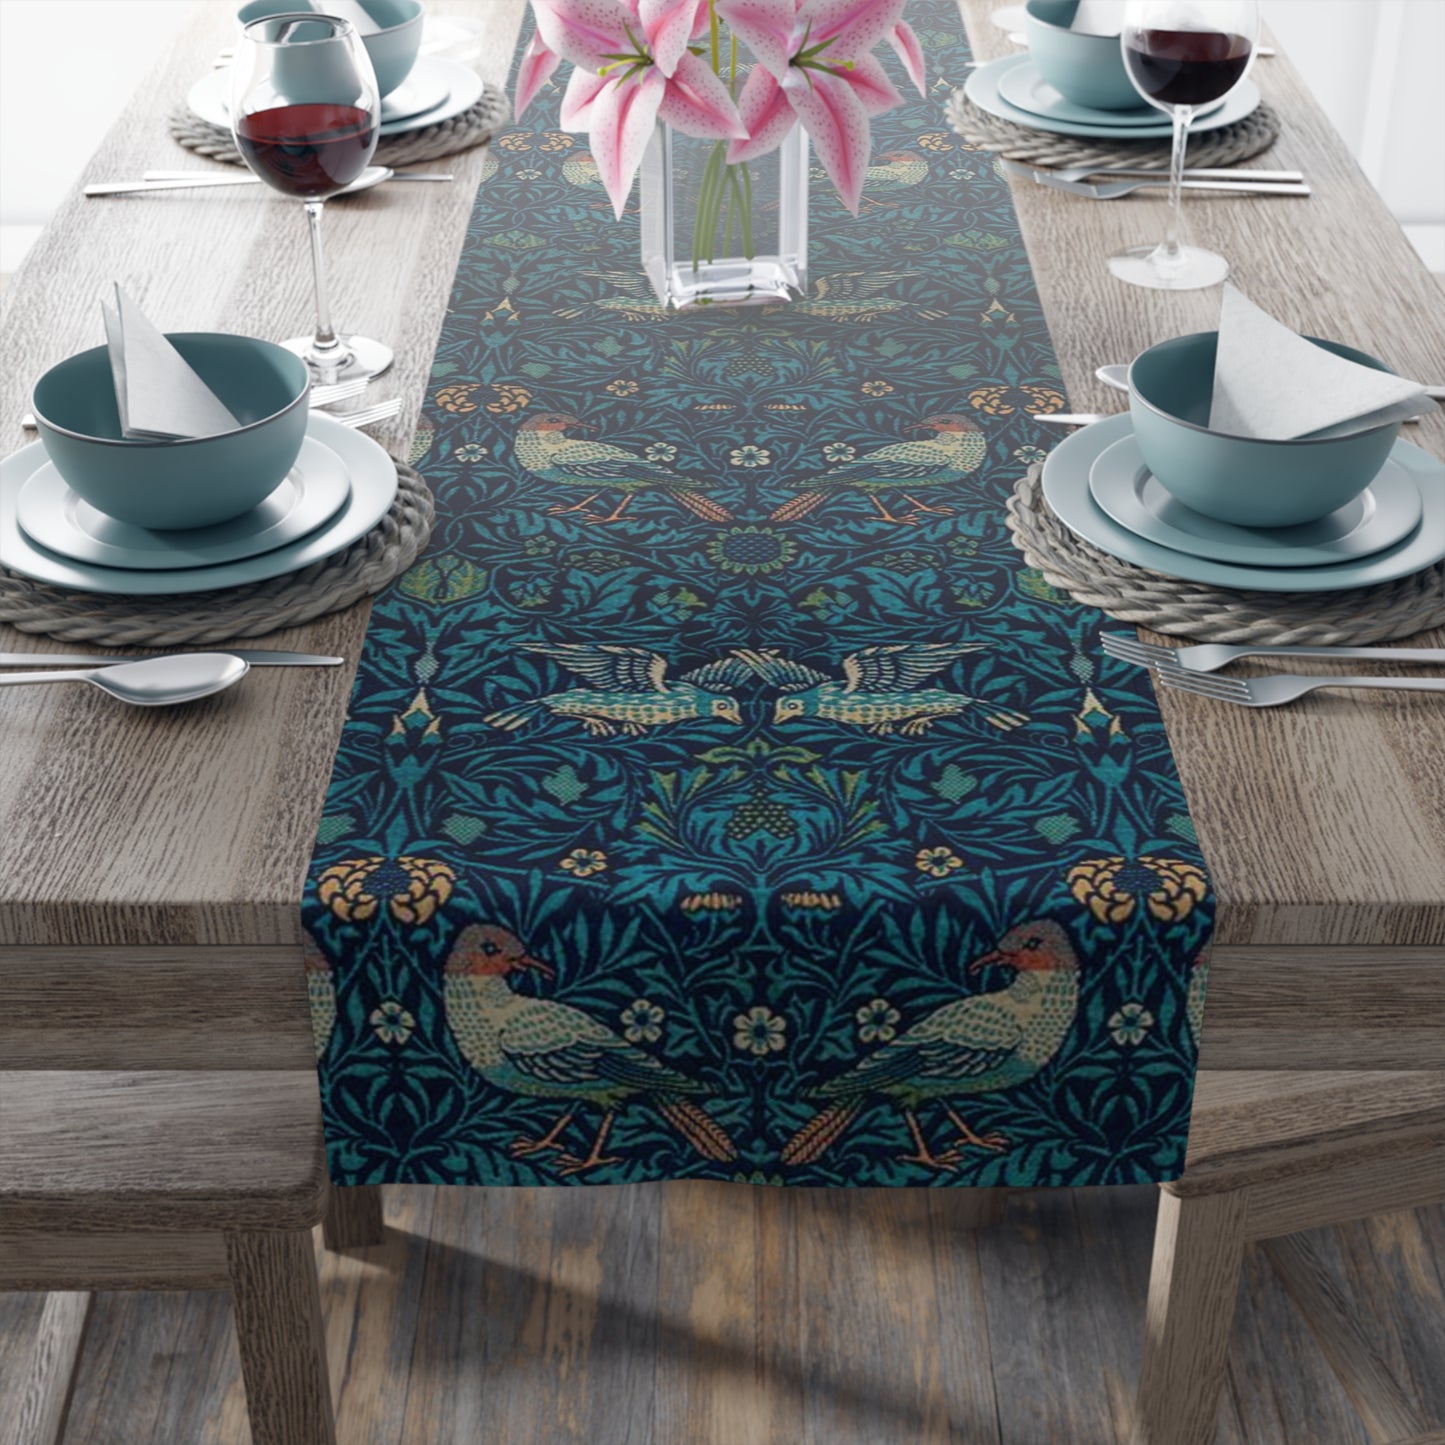 william-morris-co-table-runner-bluebird-collection-9